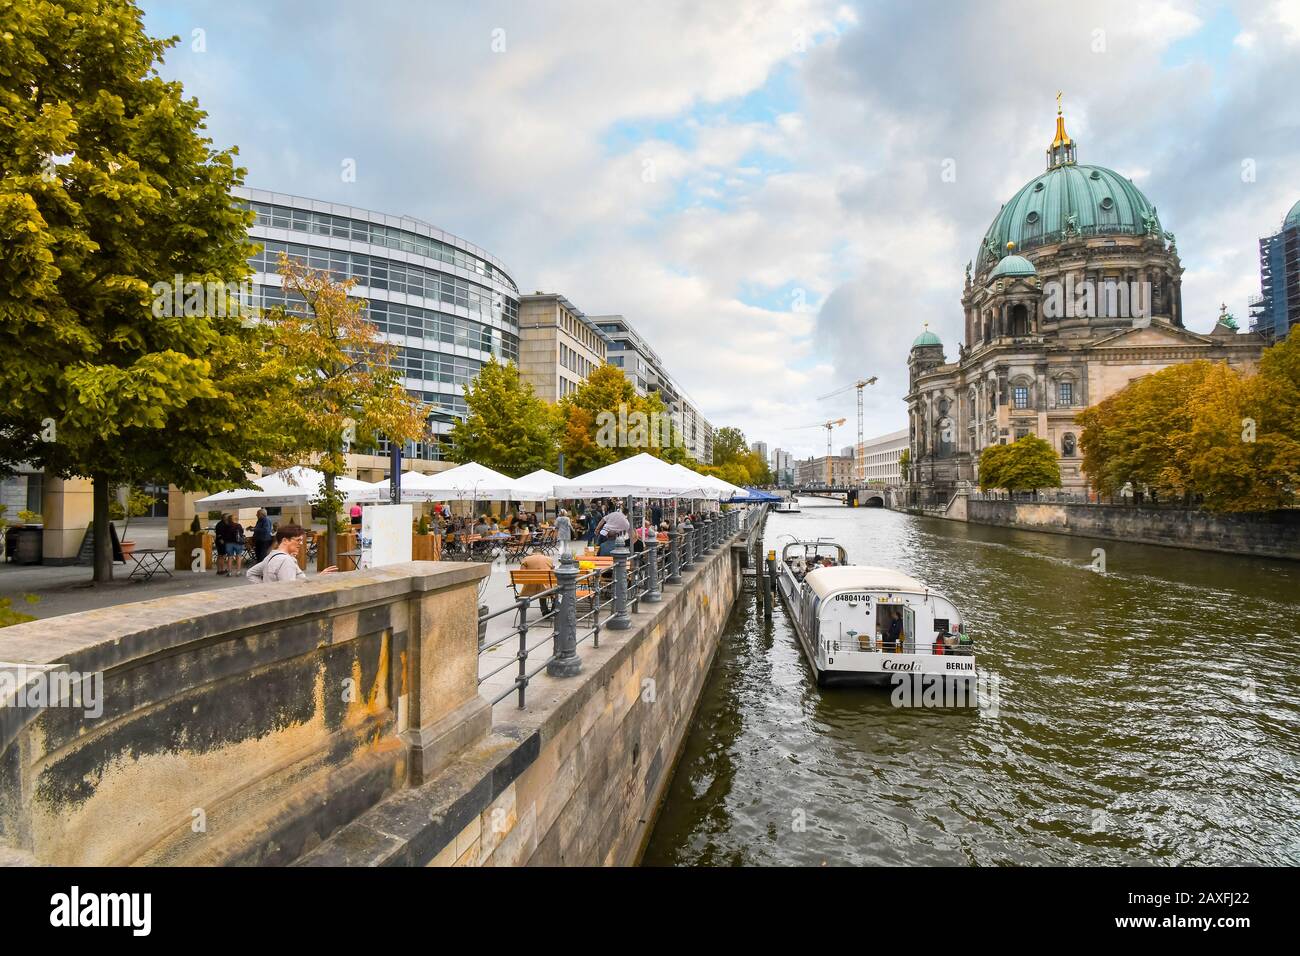 Tourists enjoy an autumn afternoon at a waterfront cafe along the Spree River with the Berlin Cathedral in view. Stock Photo